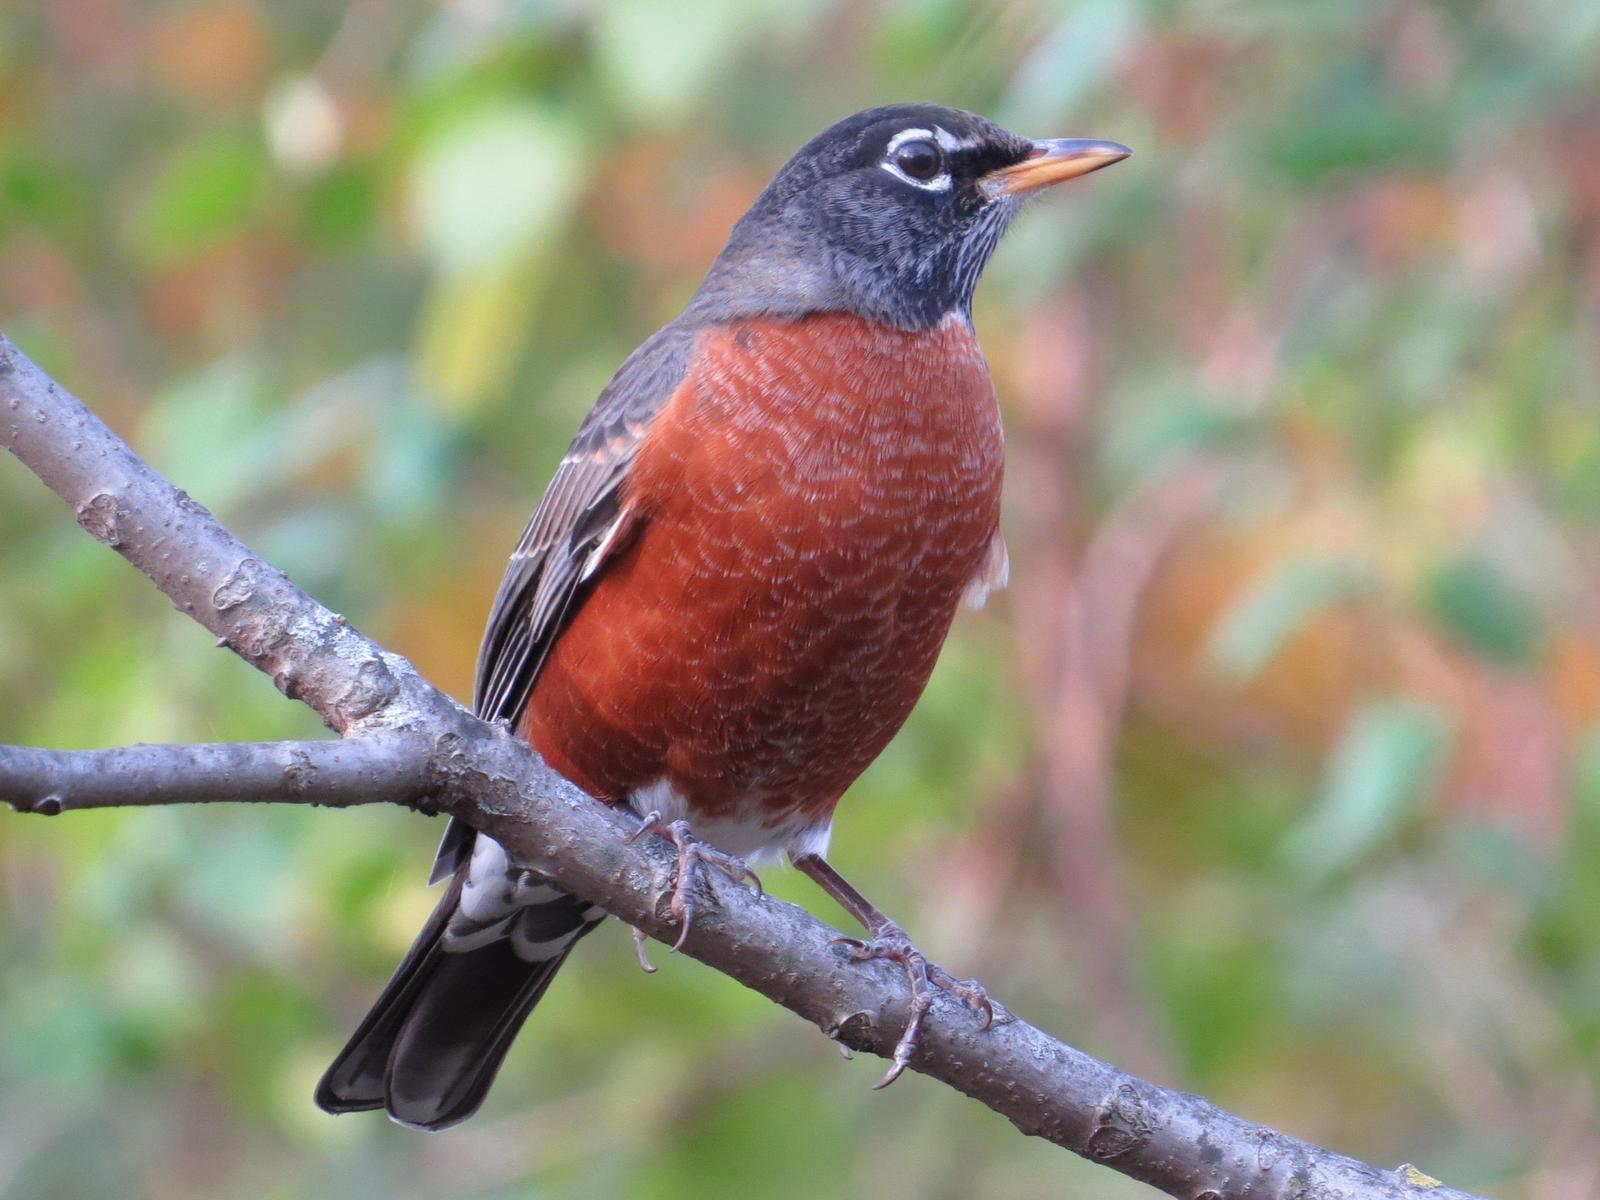 American Robin Photo by Kathy Wooding